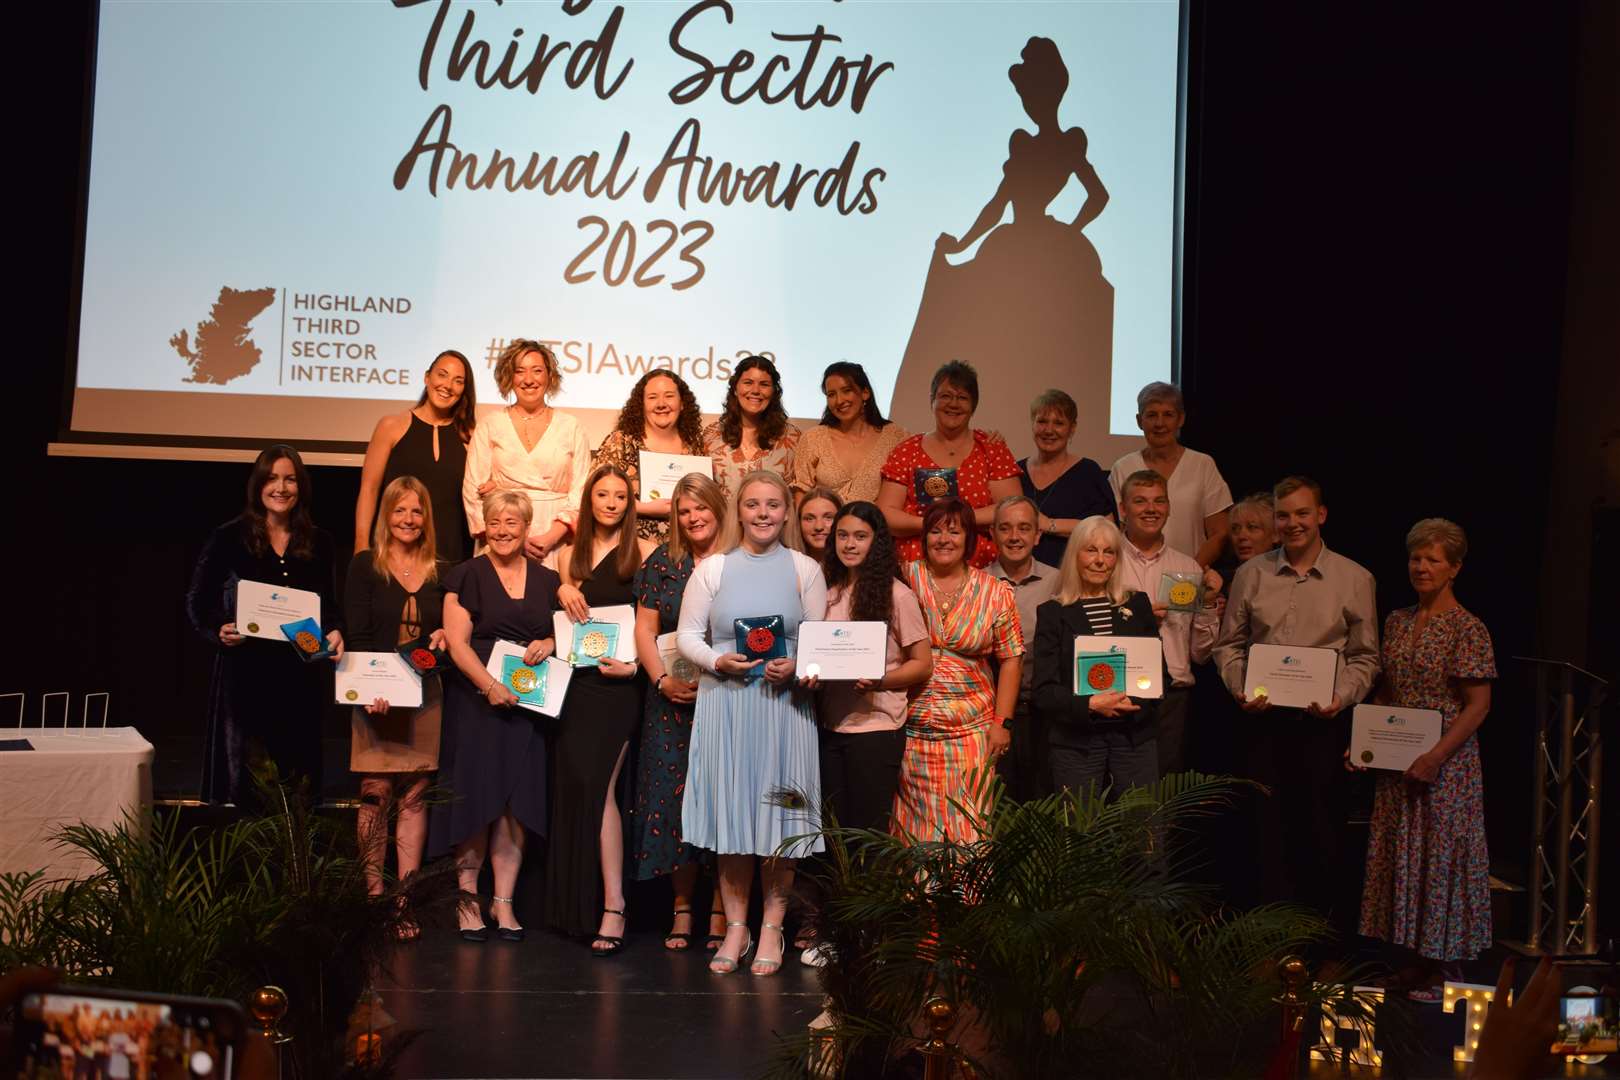 All the winners from the Highland Third Sector Interface awards 2023.